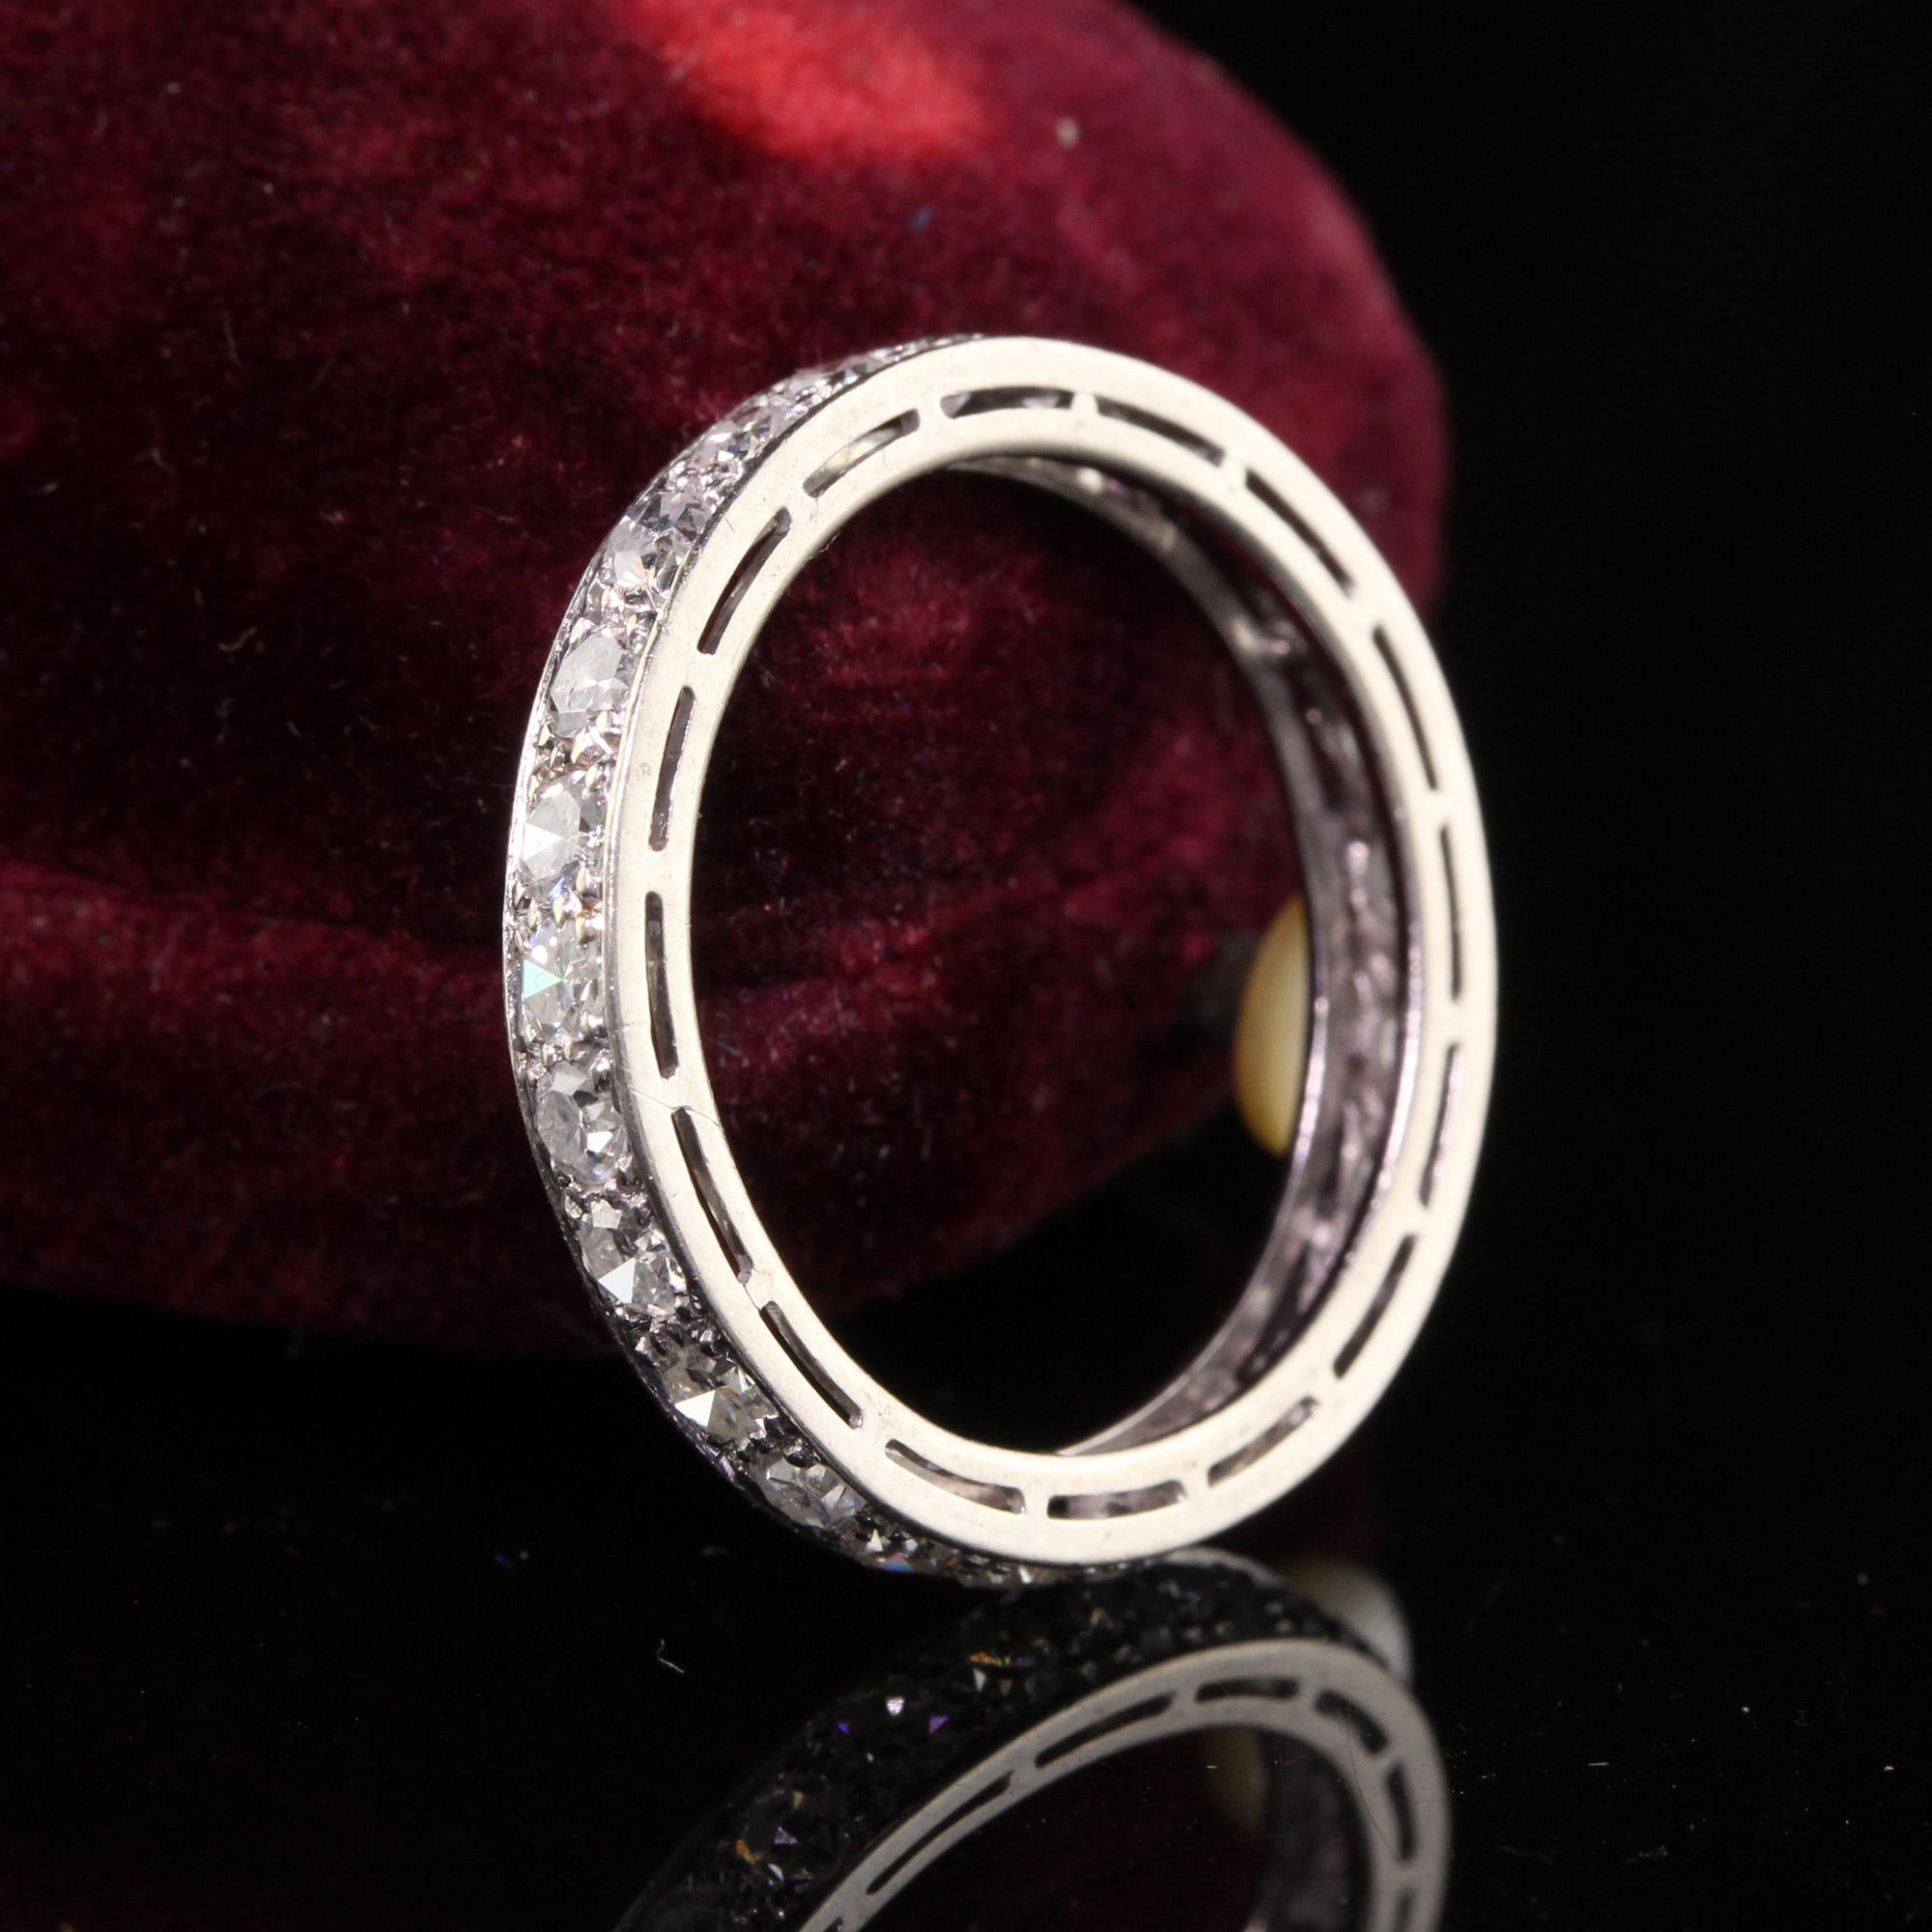 Antique Art Deco Platinum Single Cut Diamond Eternity Band In Good Condition For Sale In Great Neck, NY